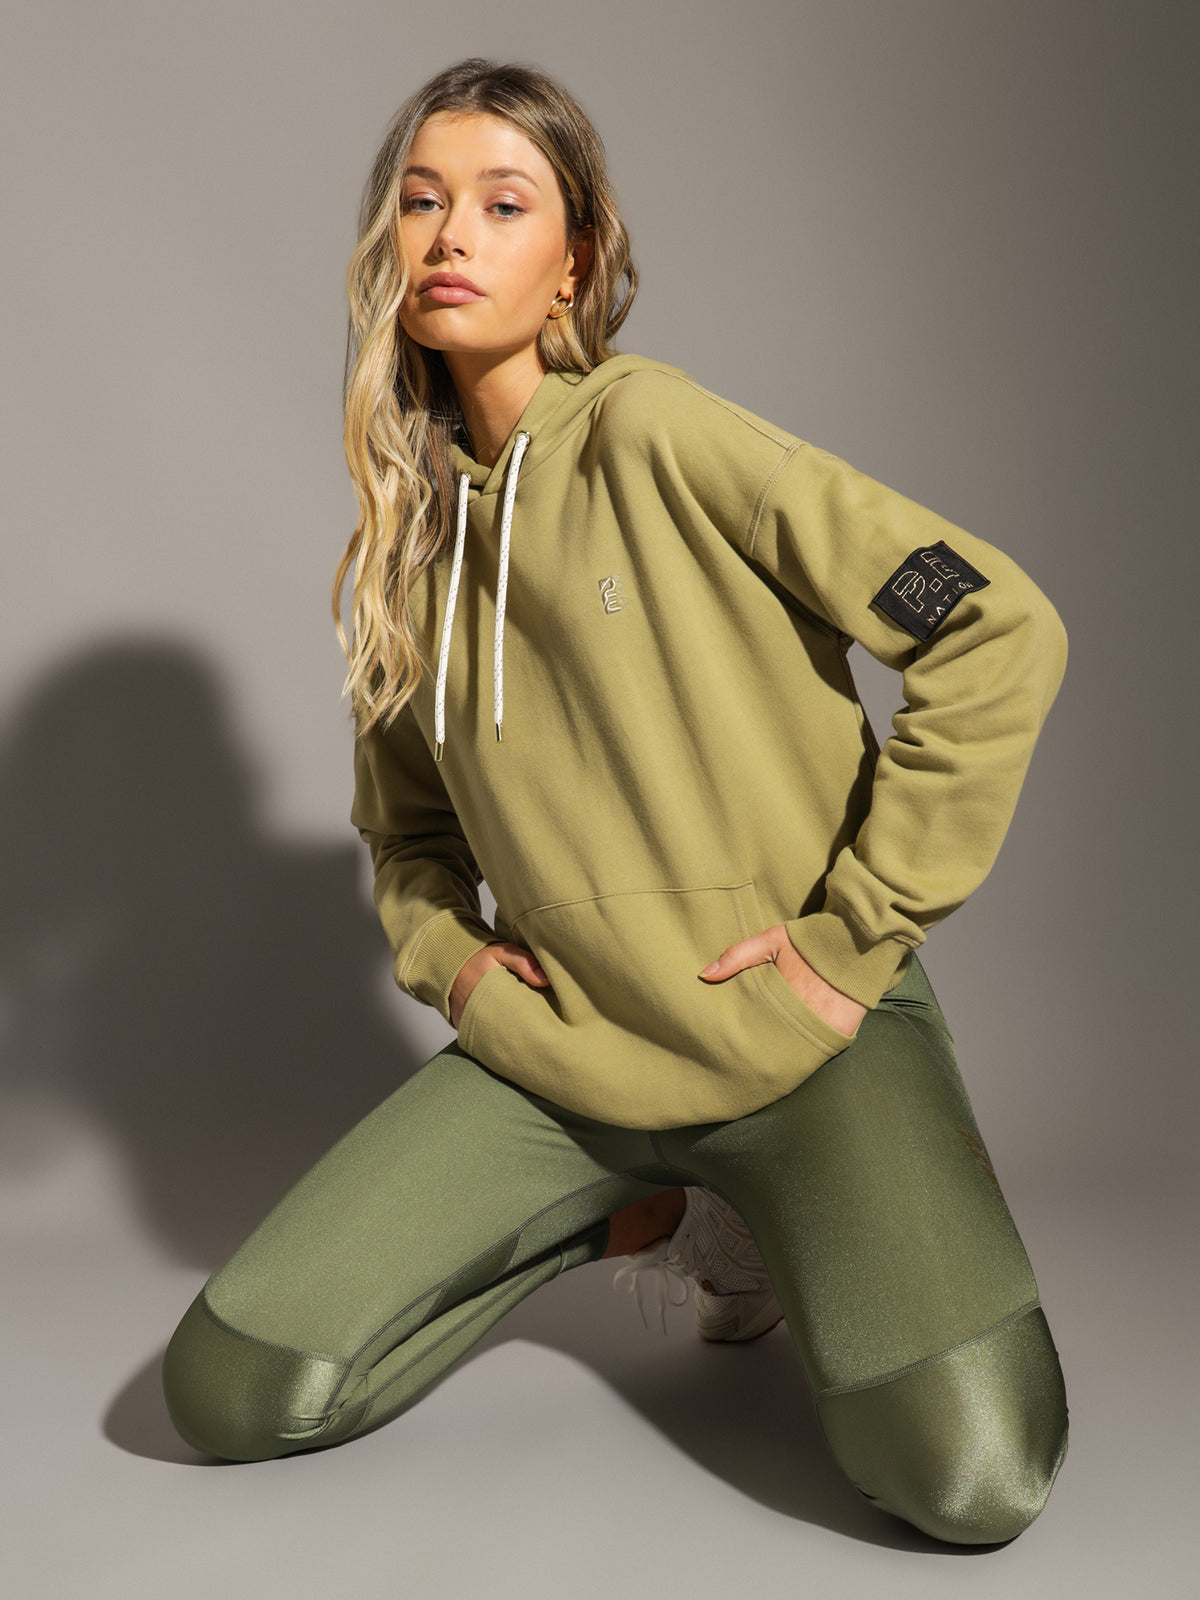 Alignment Hoodie in Olive Grey